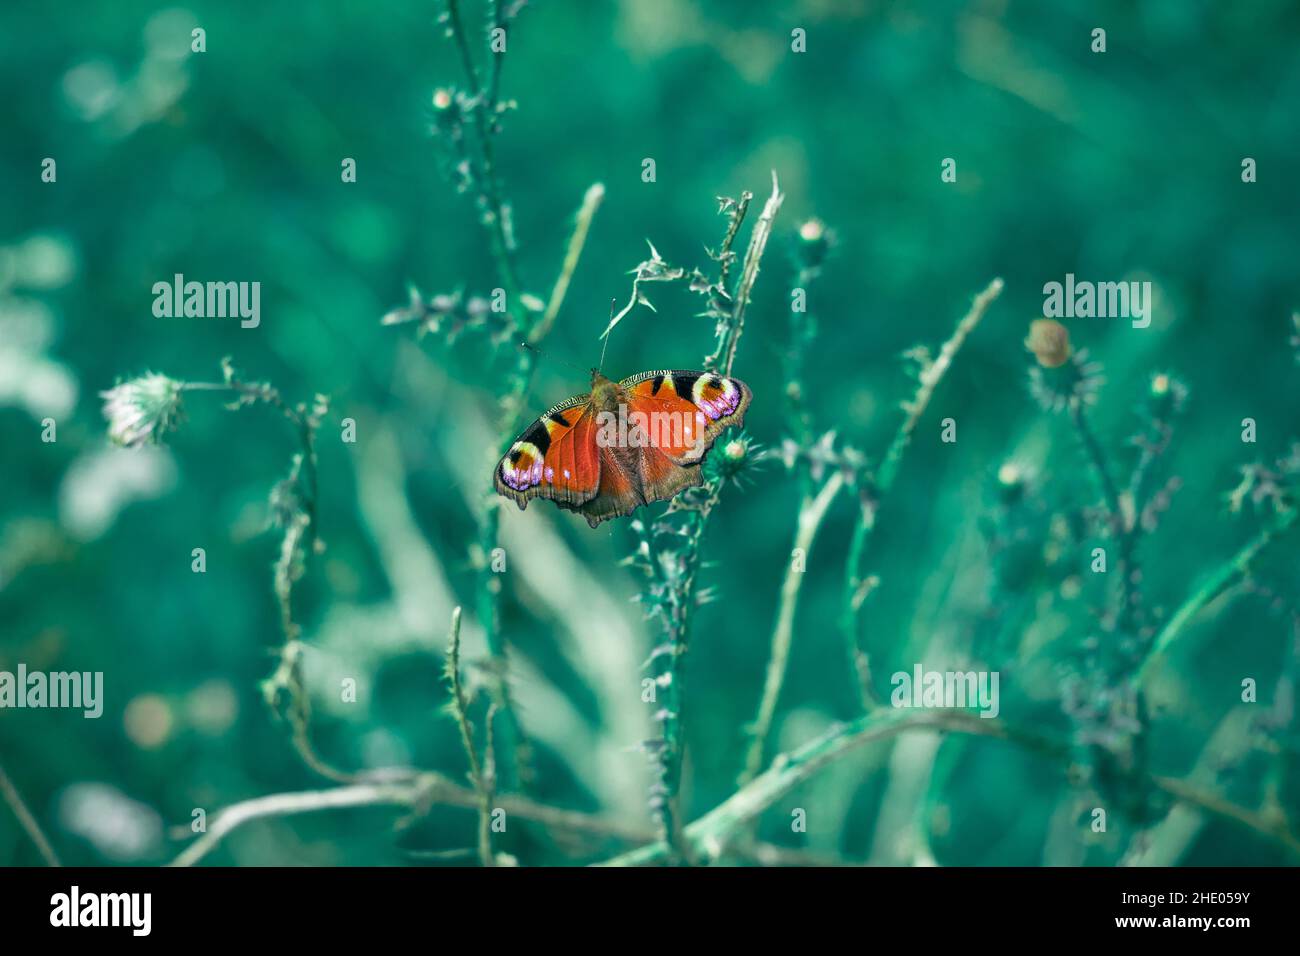 Macro shot of a butterfly on vegetation in the summer season Stock Photo